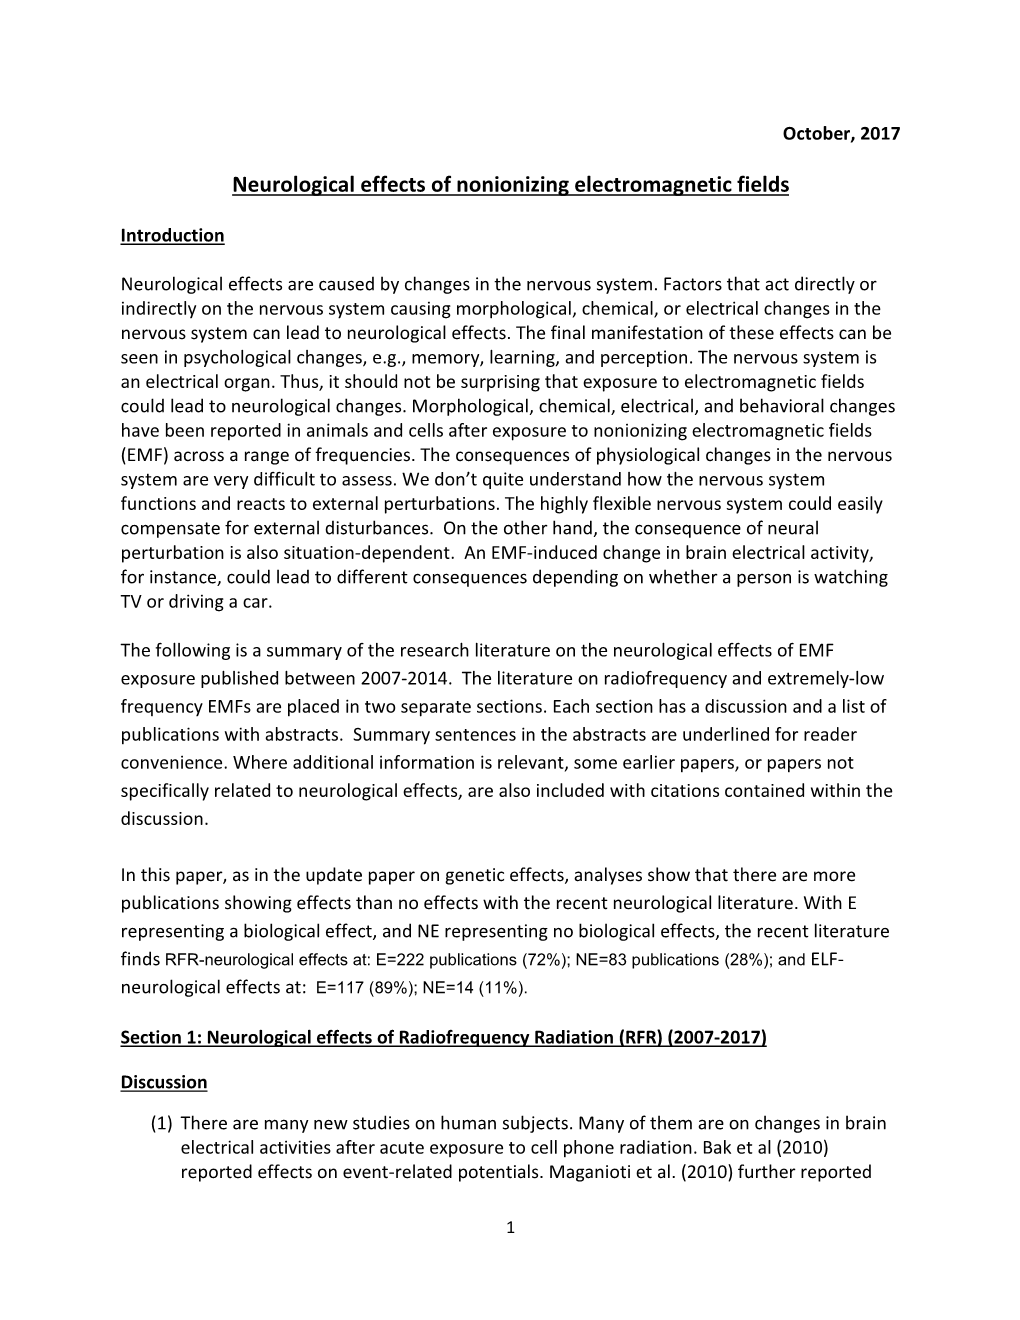 Neurological Effects of Nonionizing Electromagnetic Fields